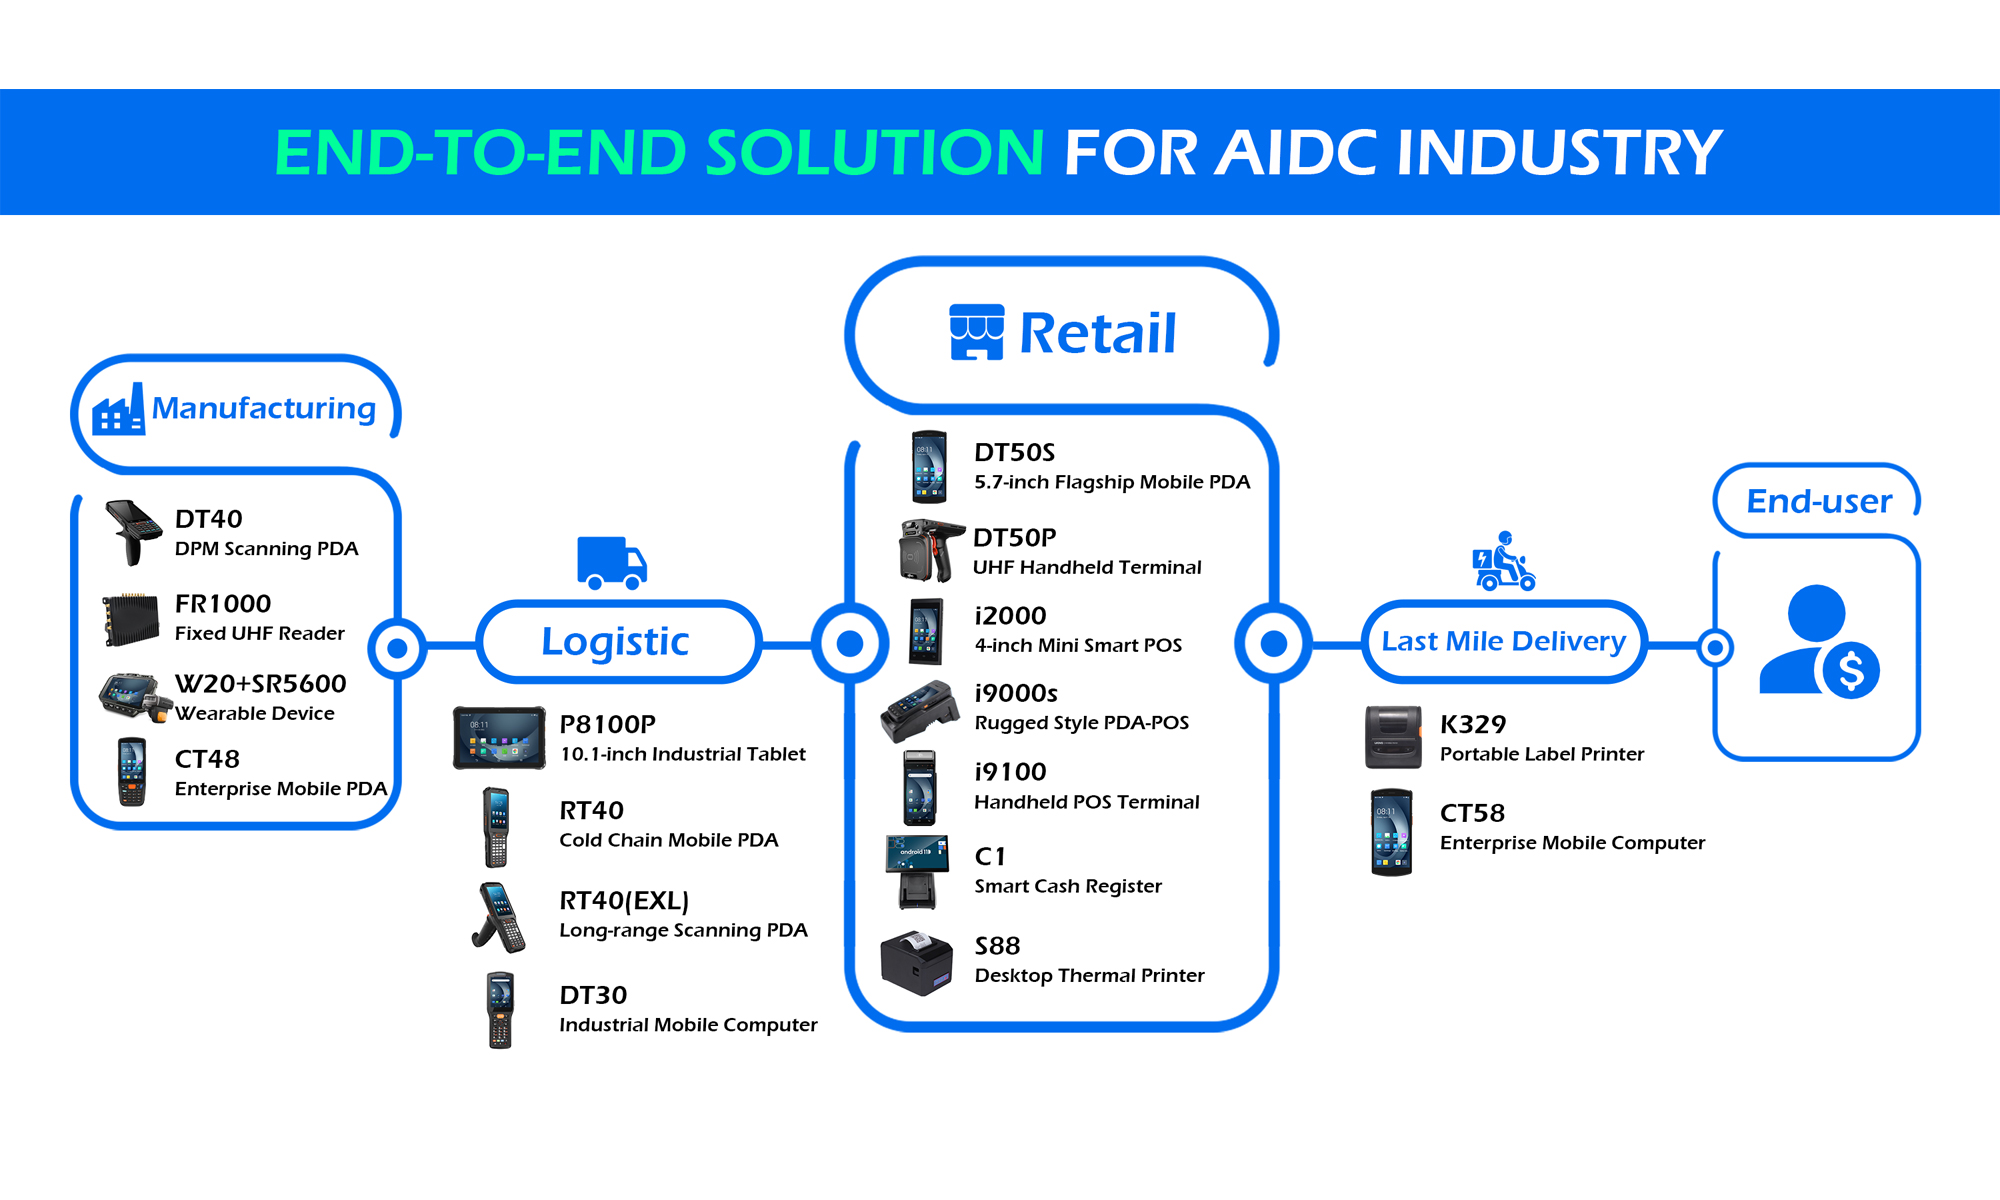 End-to-end Solution for AIDC Industry